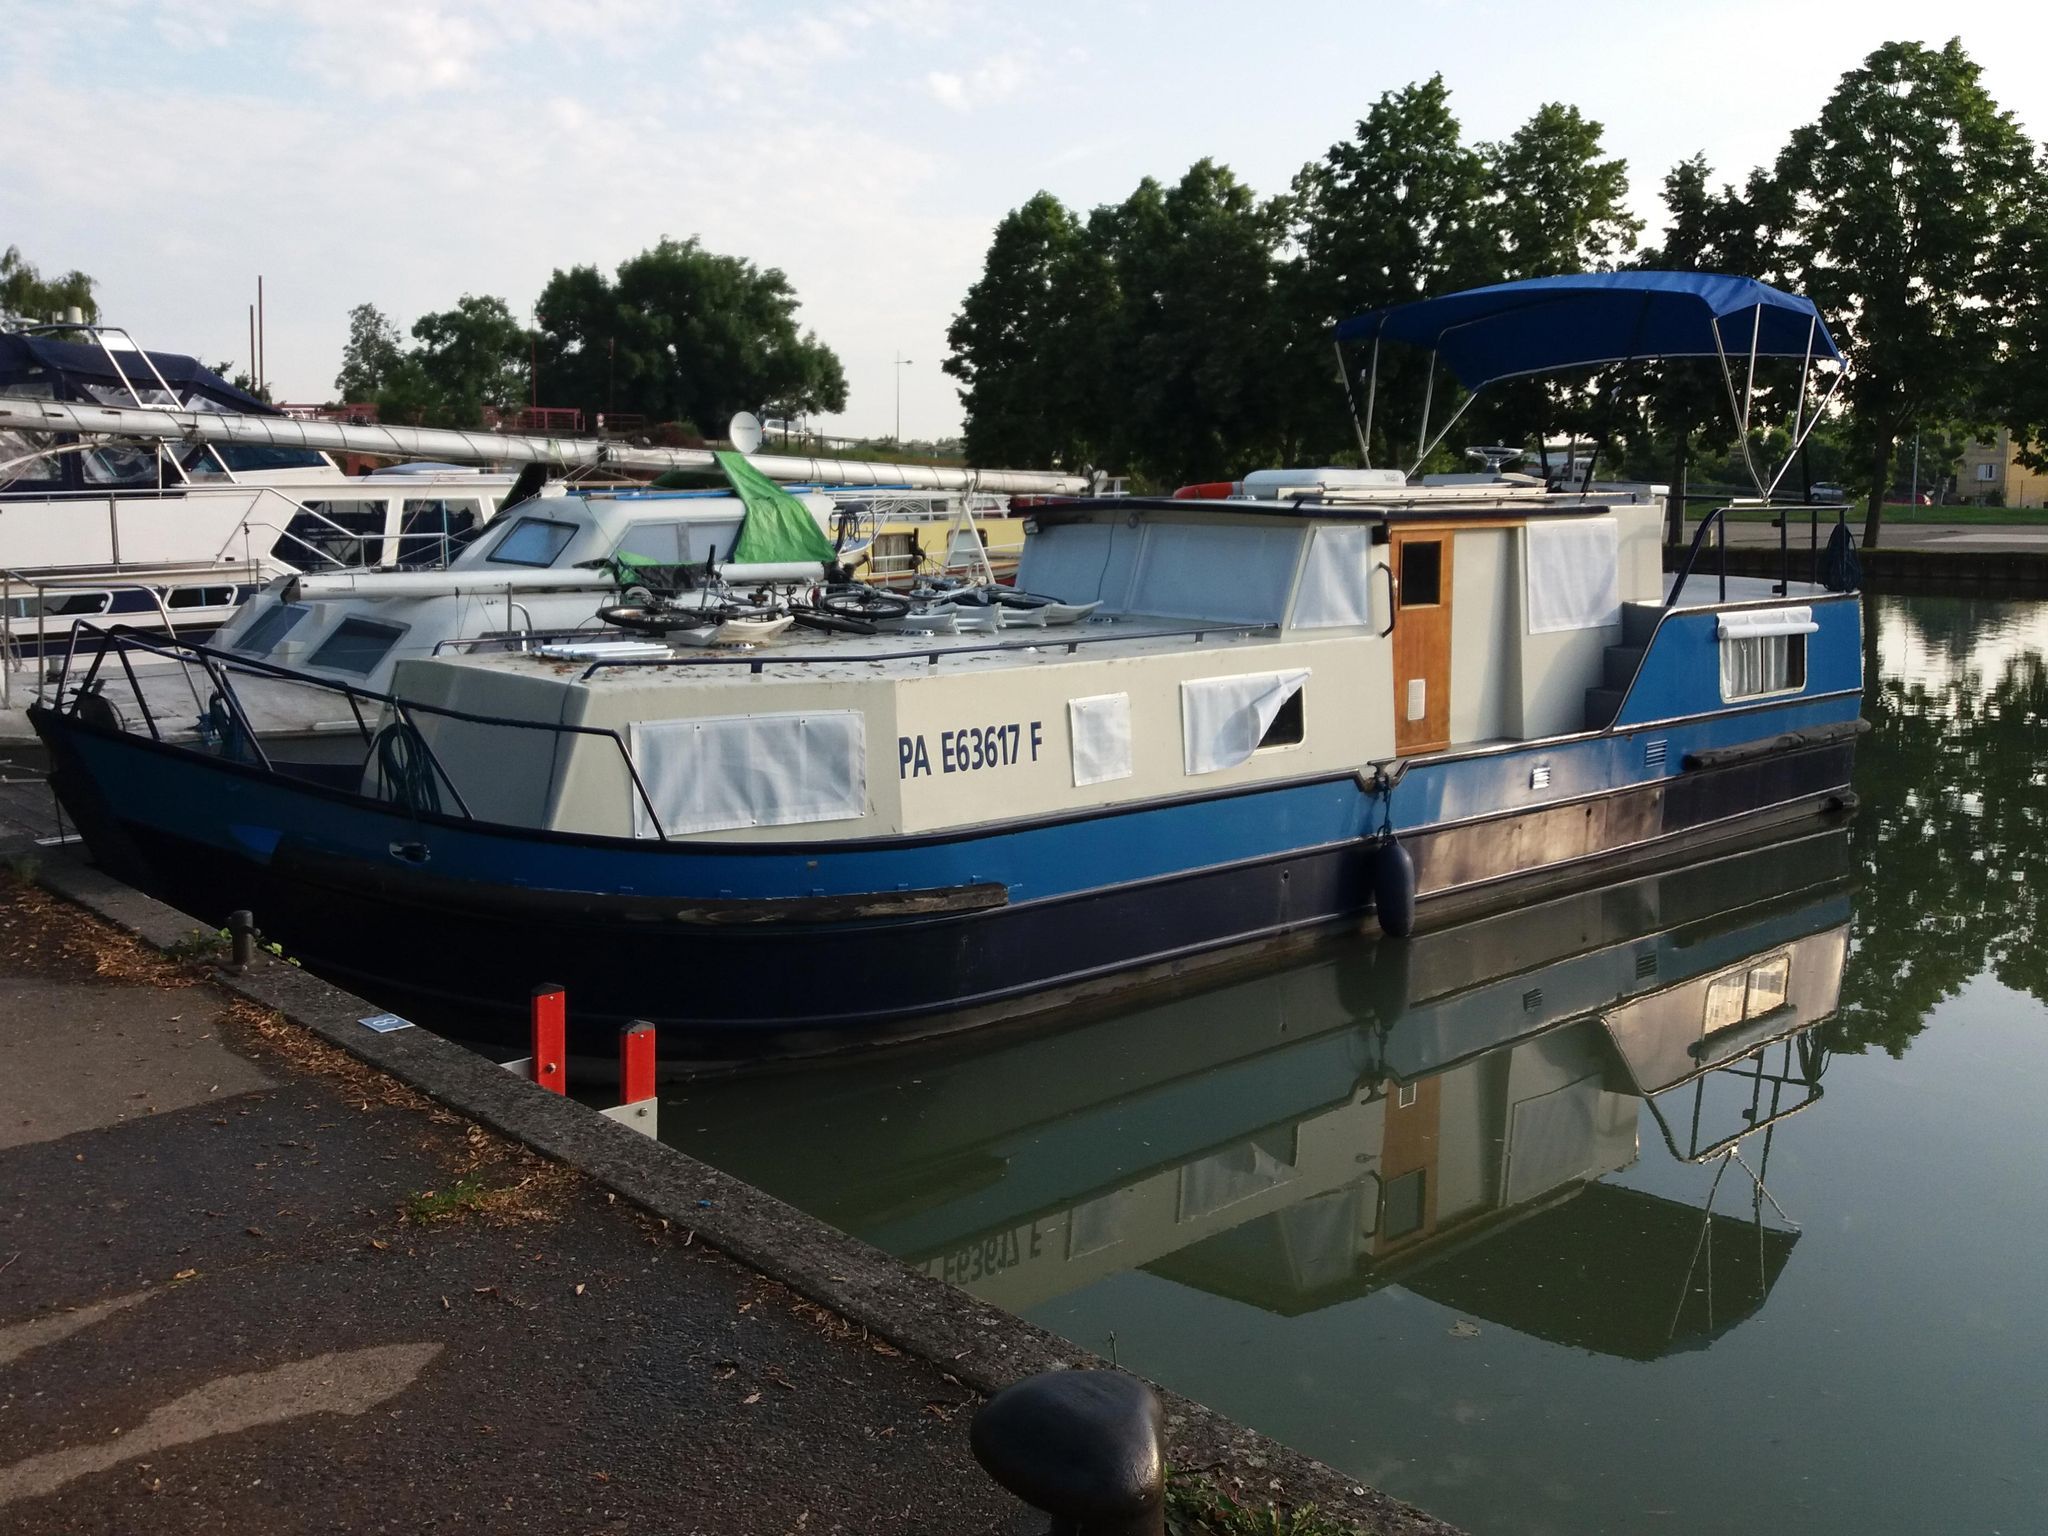 riverboat for sale europe